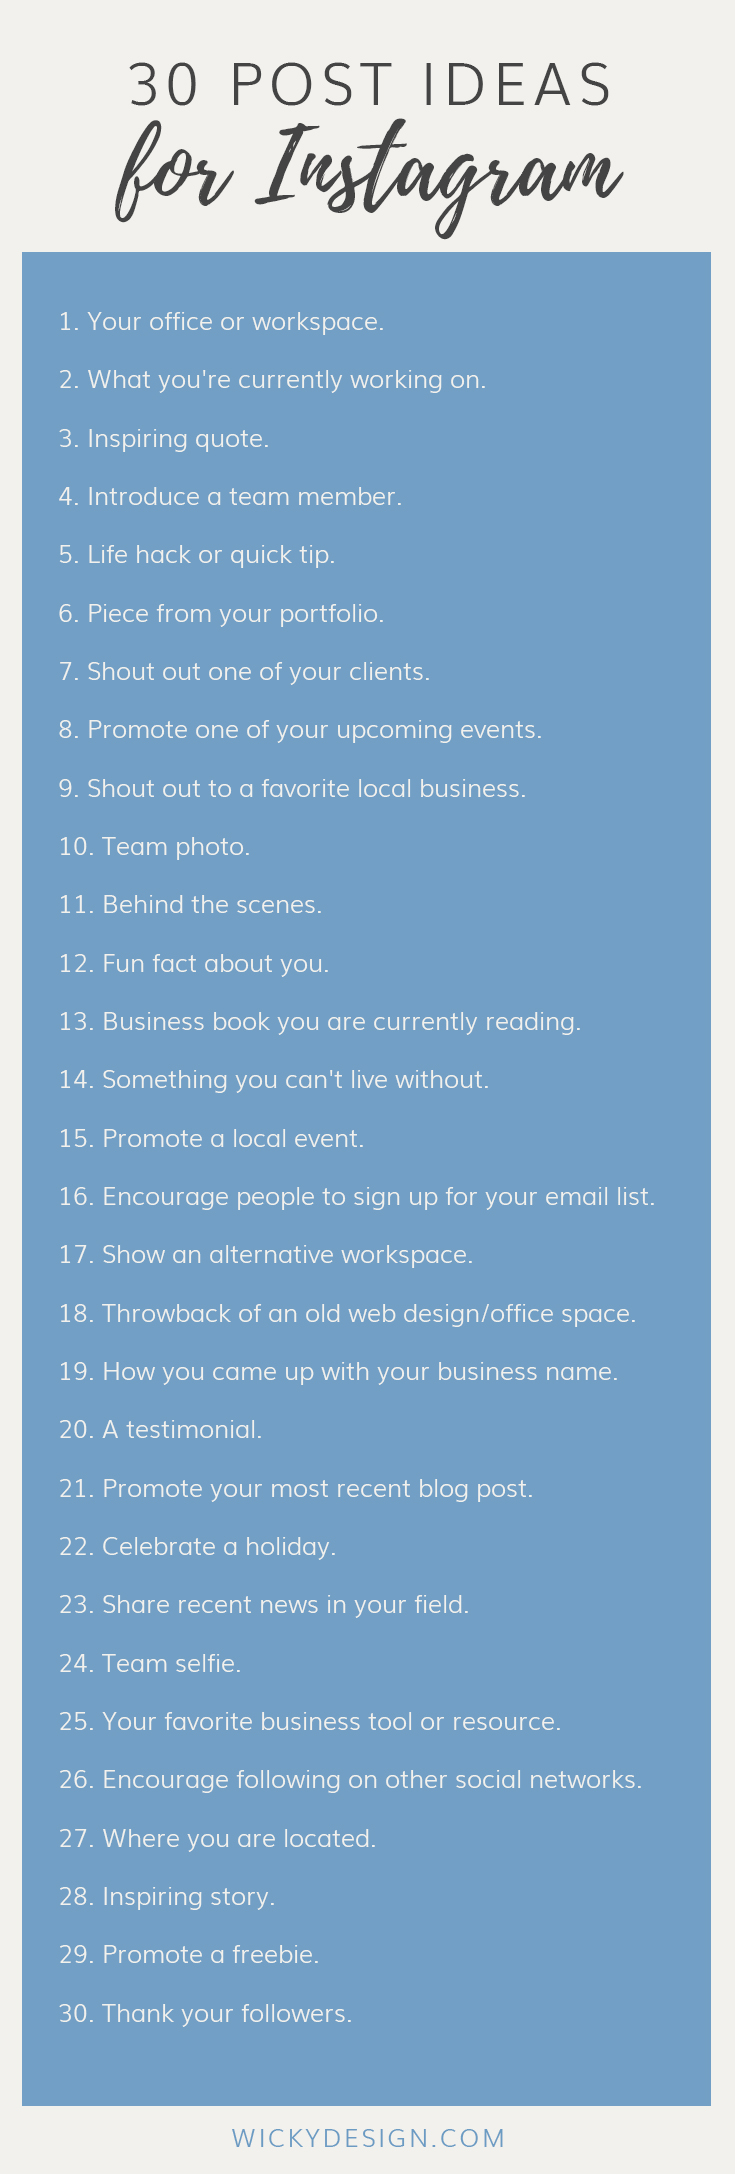 Not sure what to post on Instagram? Use this list when you're stuck.